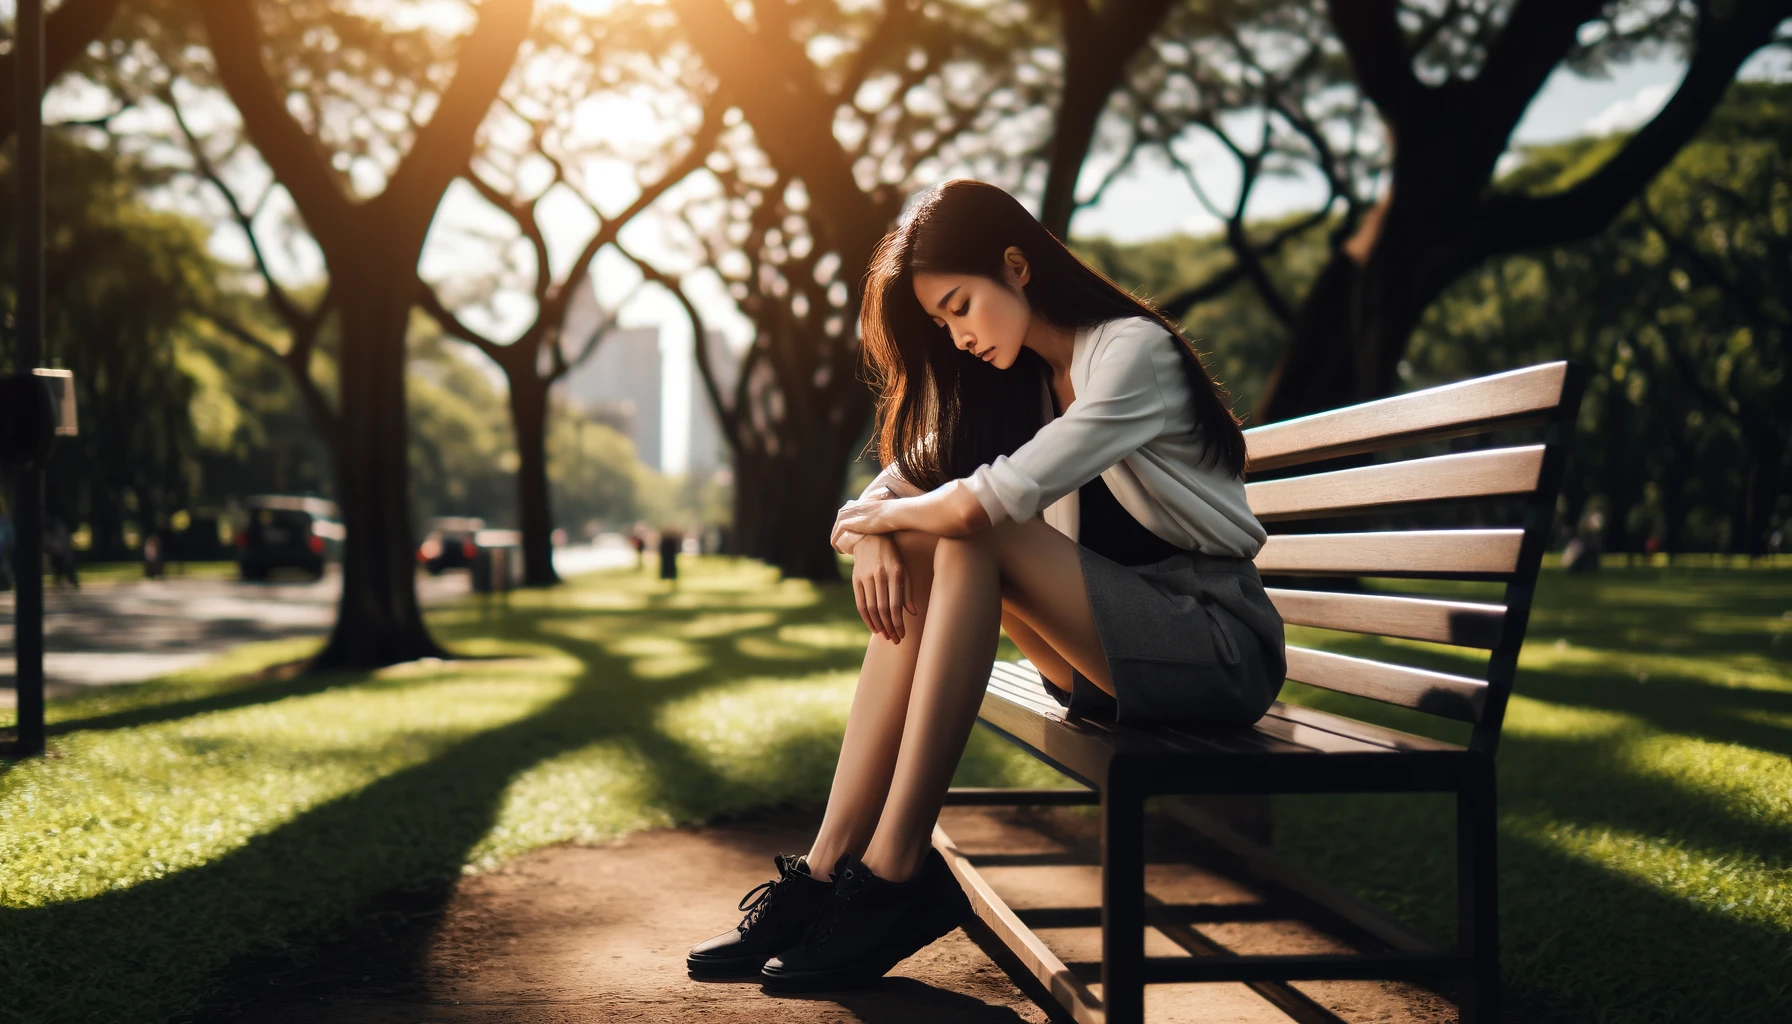 Asian American woman sitting on a park bench in solitude with somber mood feeling defeated